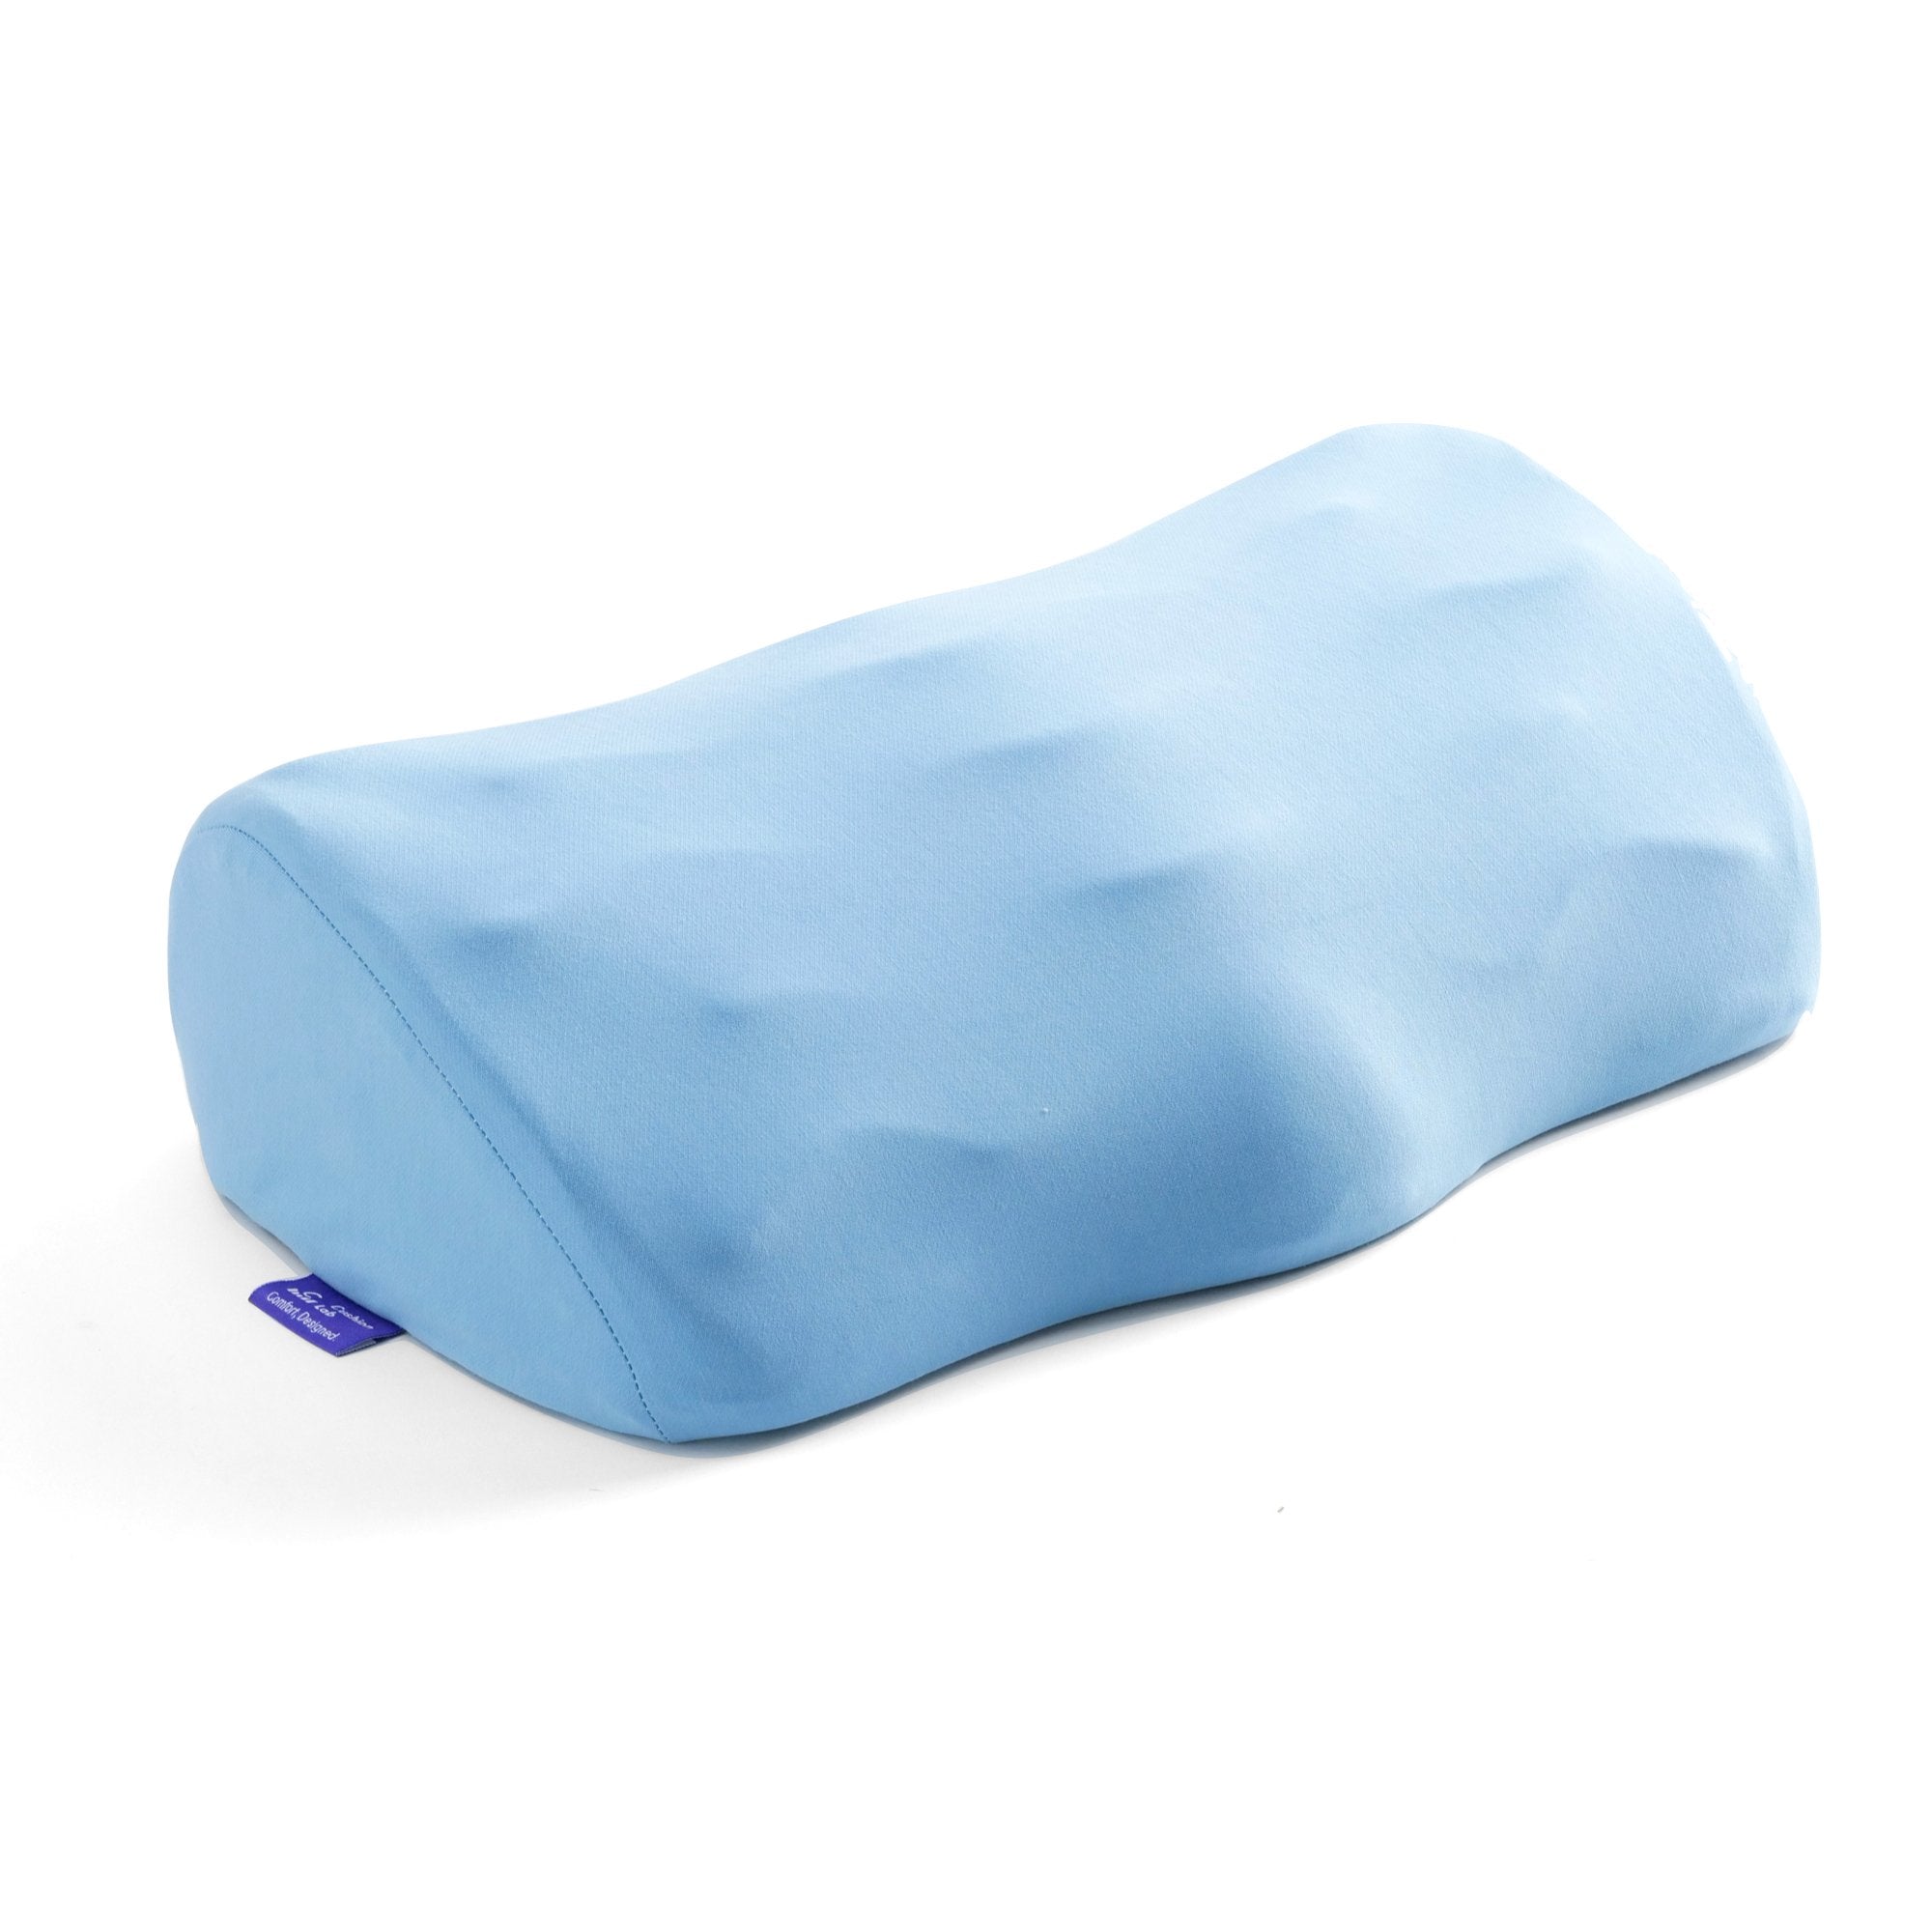 Cushie Pillows Memory Foam Neck Pillow with Removable Cover - Blue